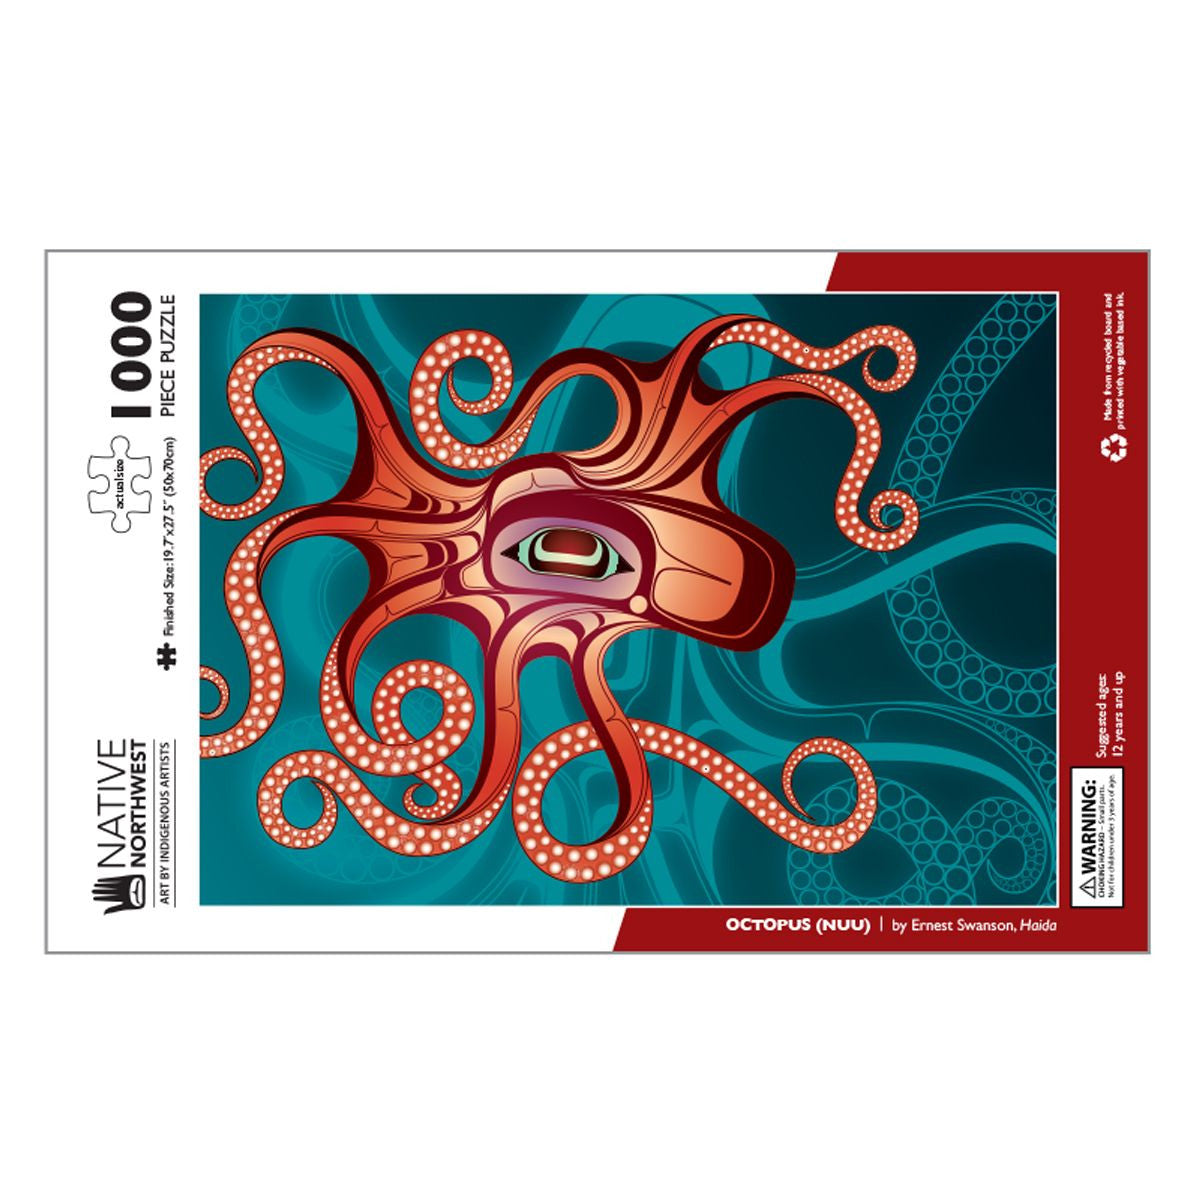 1,000 Piece Jigsaw Puzzle | Nuu (Octopus) by Ernest Swanson